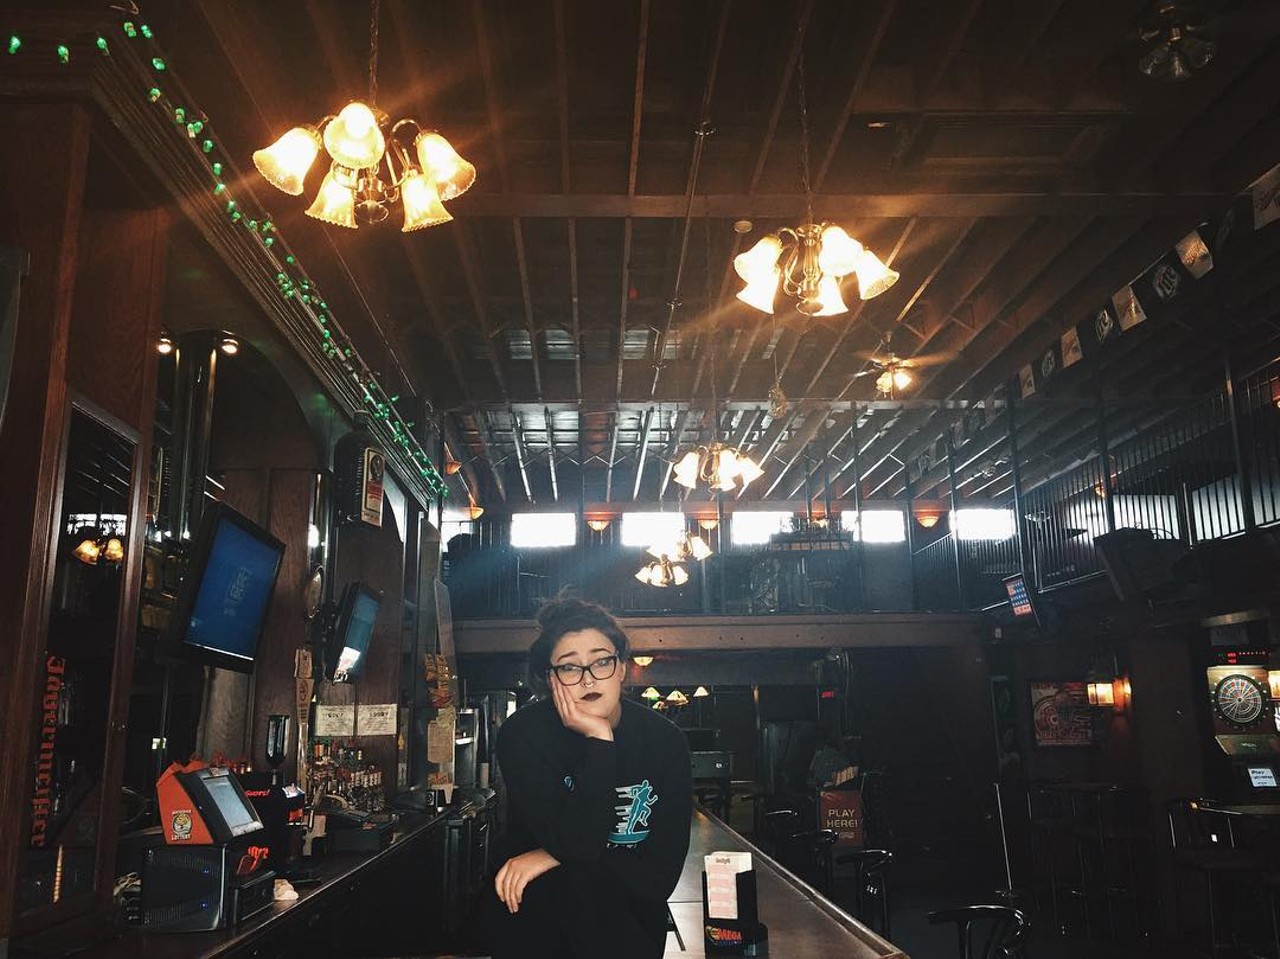 New Dodge Lounge
8850 Joseph Campau Ave, Hamtramck
(313)-874-5963 It&#146;s a dive bar. There purpose it to escape reality. And douchebags from high school.
Photo via IG user @racheldunkel.